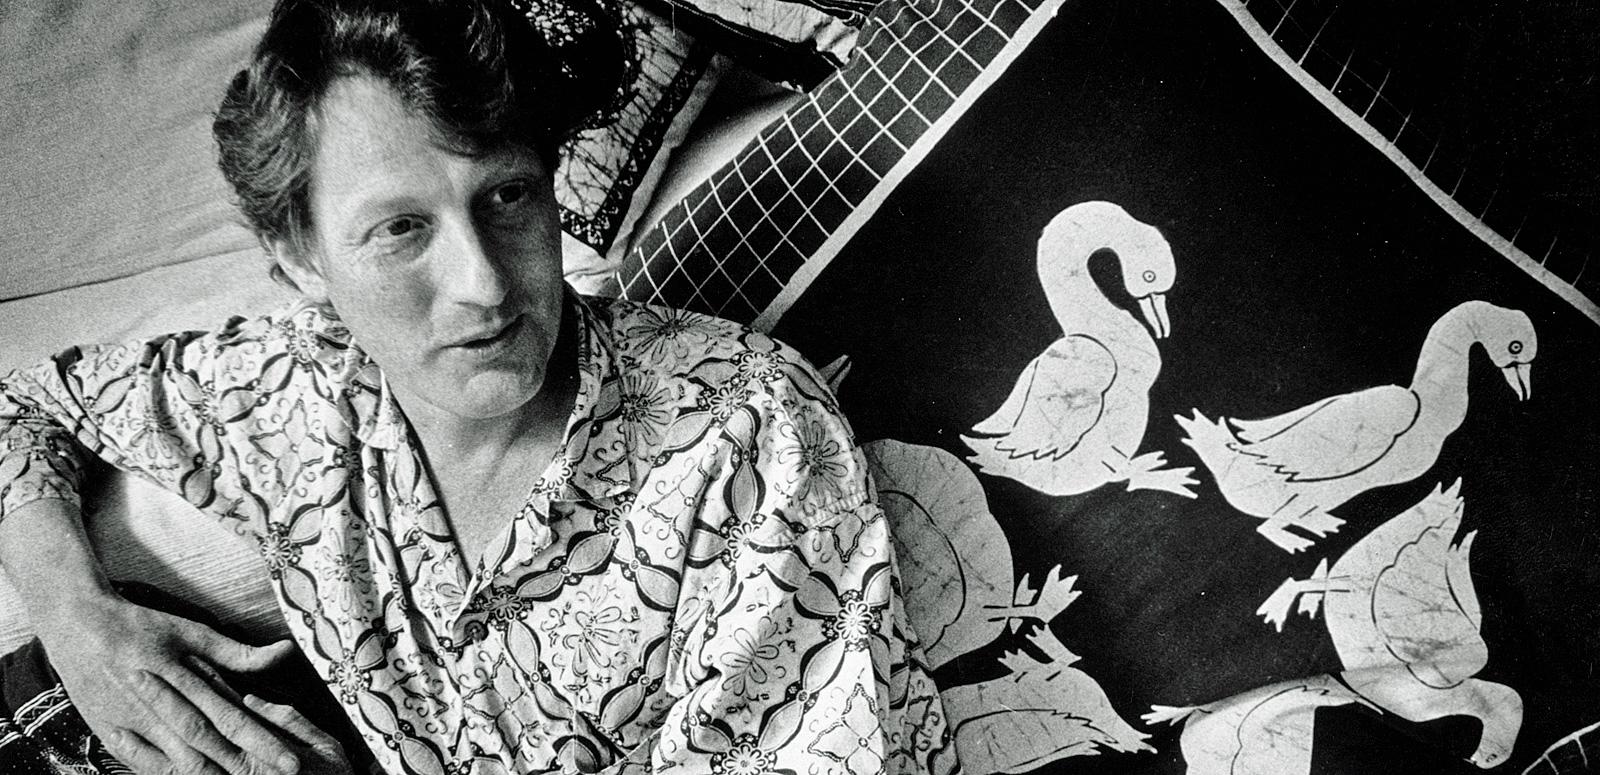 Australian documentary filmmaker, John Darling, pictured from waist up, wearing a Balinese shirt and leading against a cushion with images of birds on it.